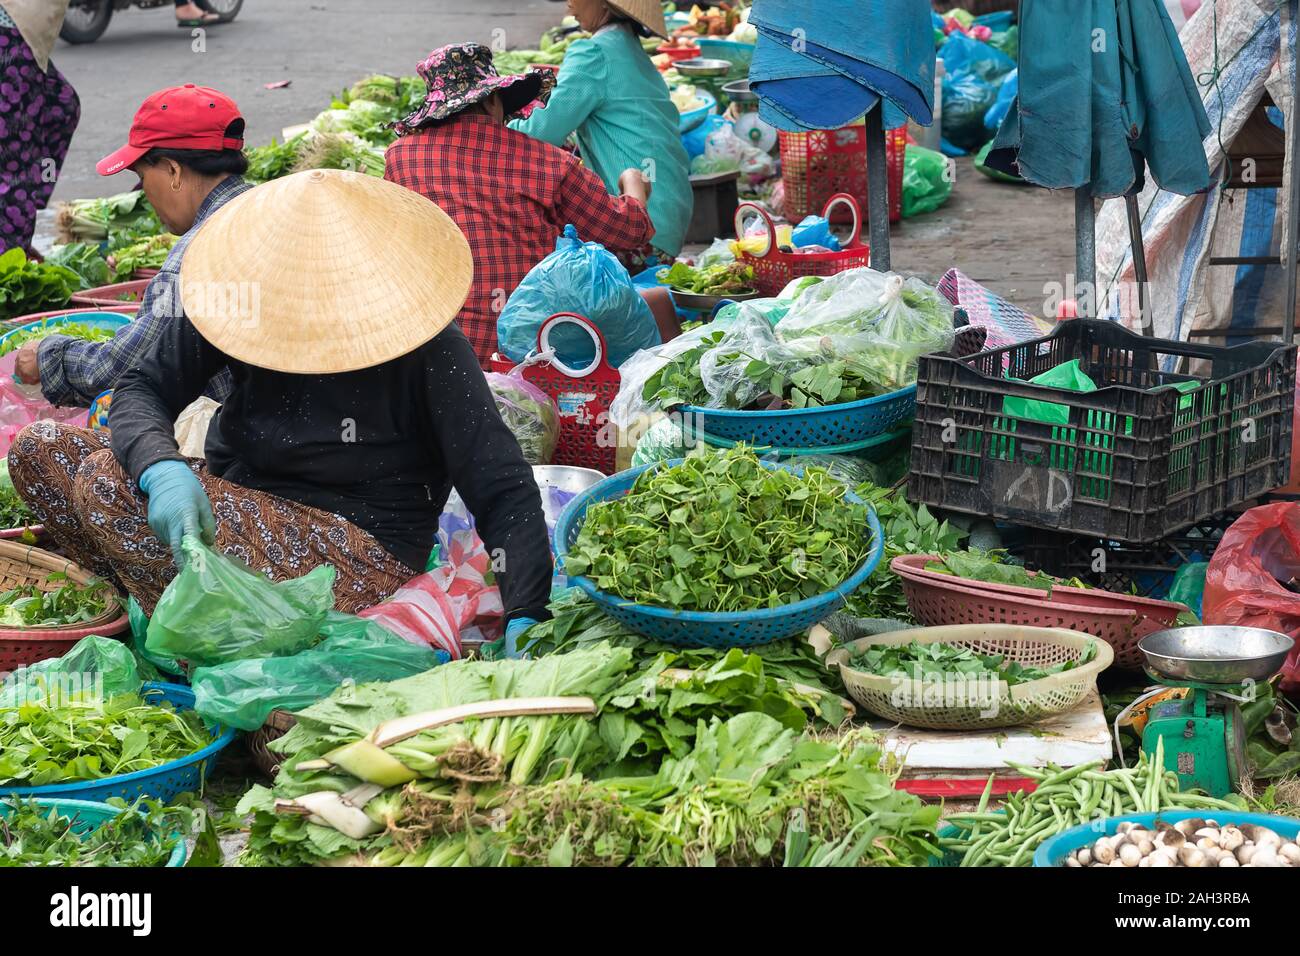 Sellers selling fruits at a local Market in Hoi An, Vietnam. Stock Photo